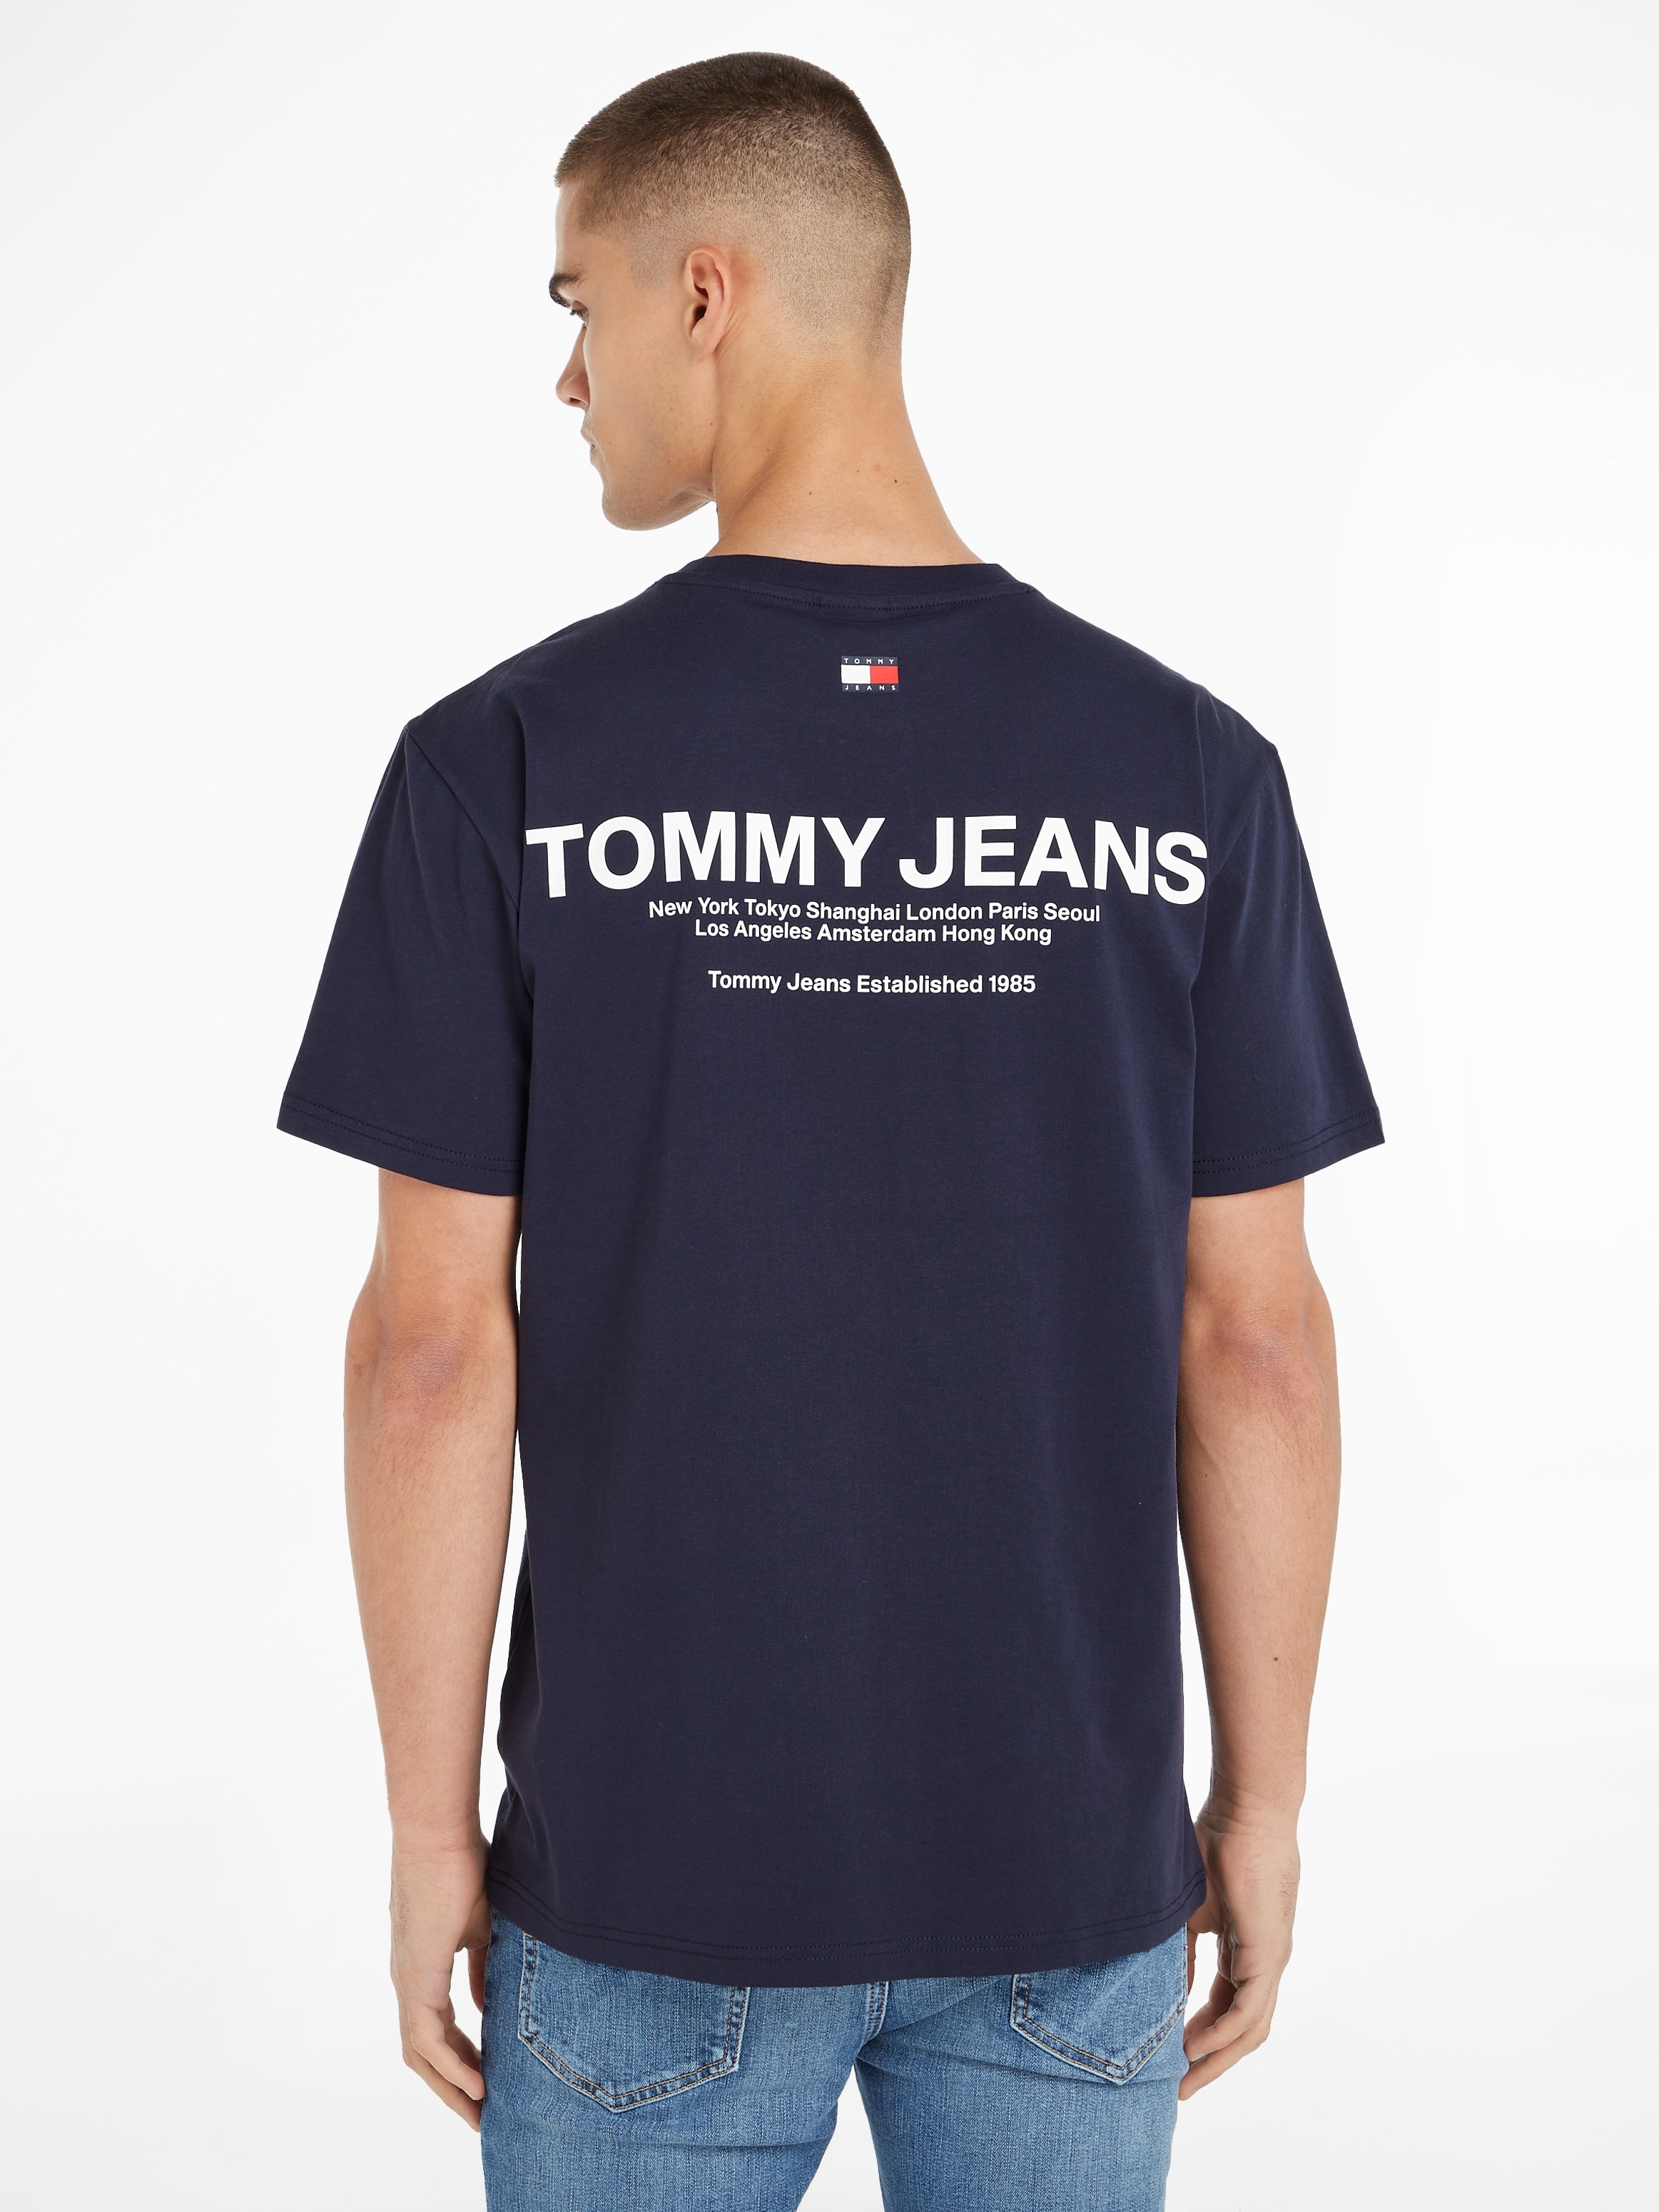 BACK TEE« CLSC PRINT online bei »TJM OTTO LINEAR Tommy T-Shirt Jeans kaufen